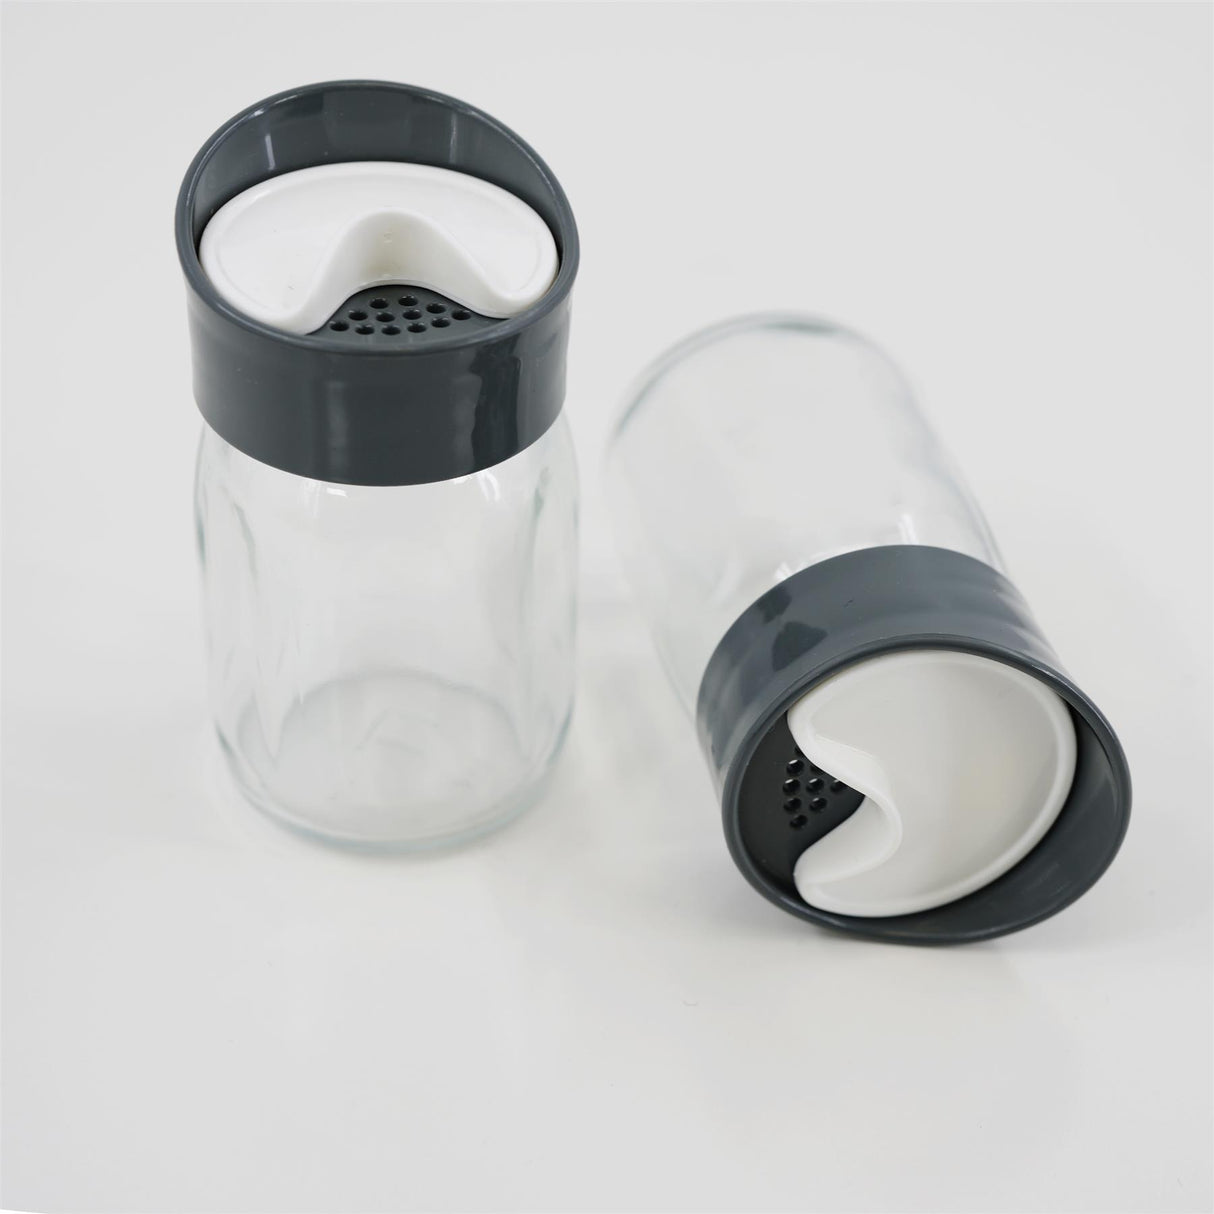 Salt and Pepper Shaker Set / Salt and Pepper Pots With Holder by Geezy - UKBuyZone